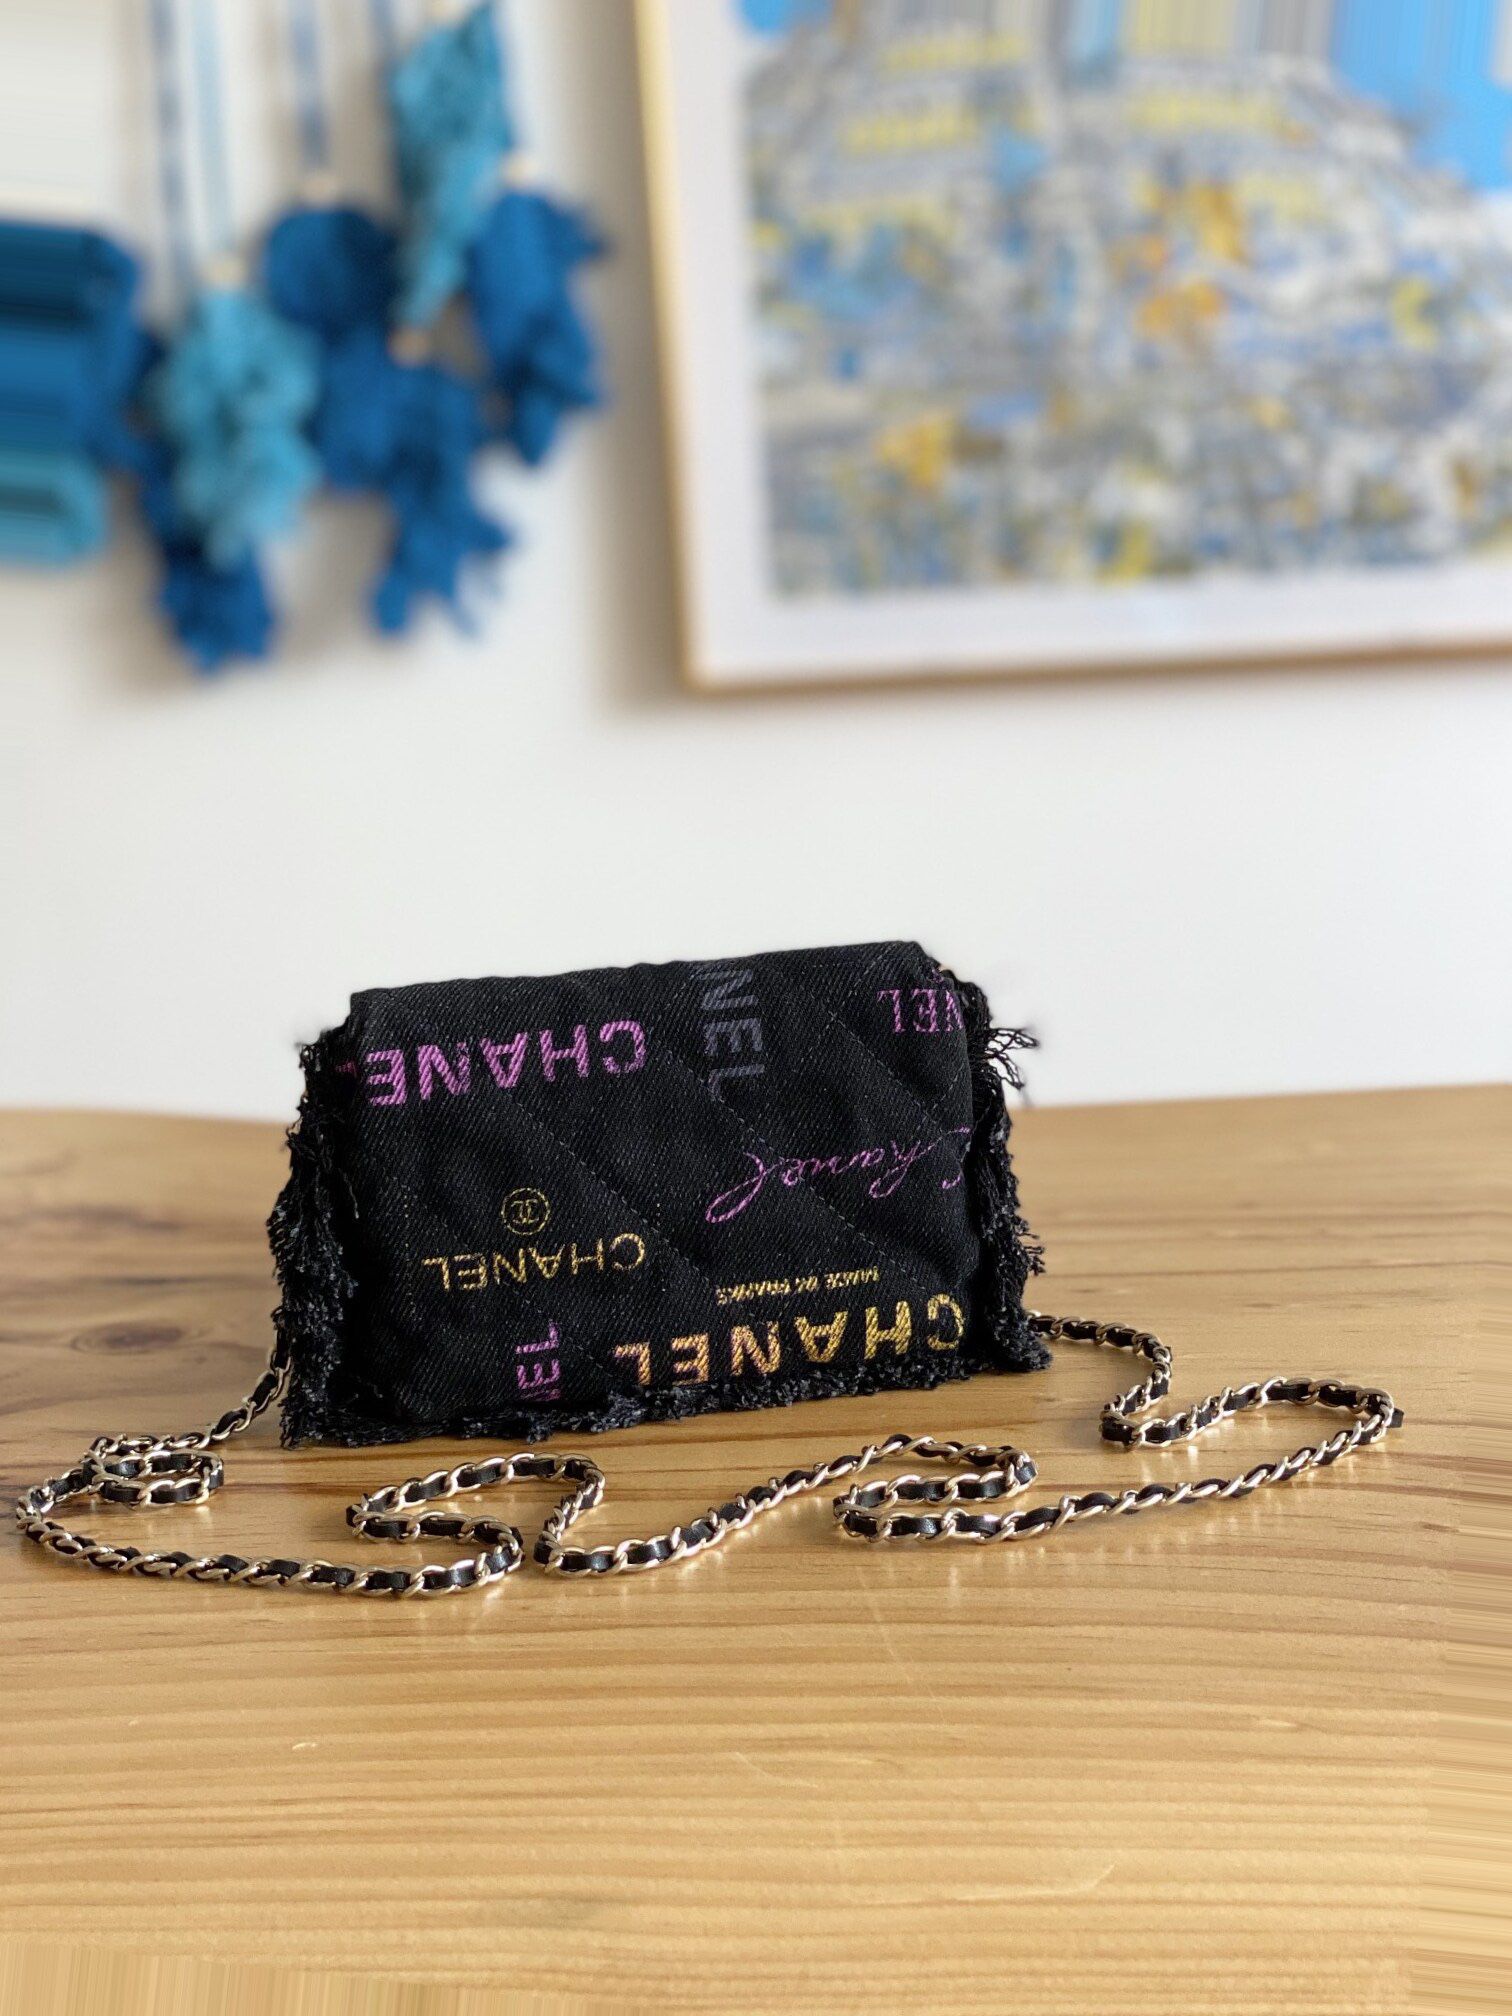 Authentic LV Wallet for Sale in Dallas, TX - OfferUp